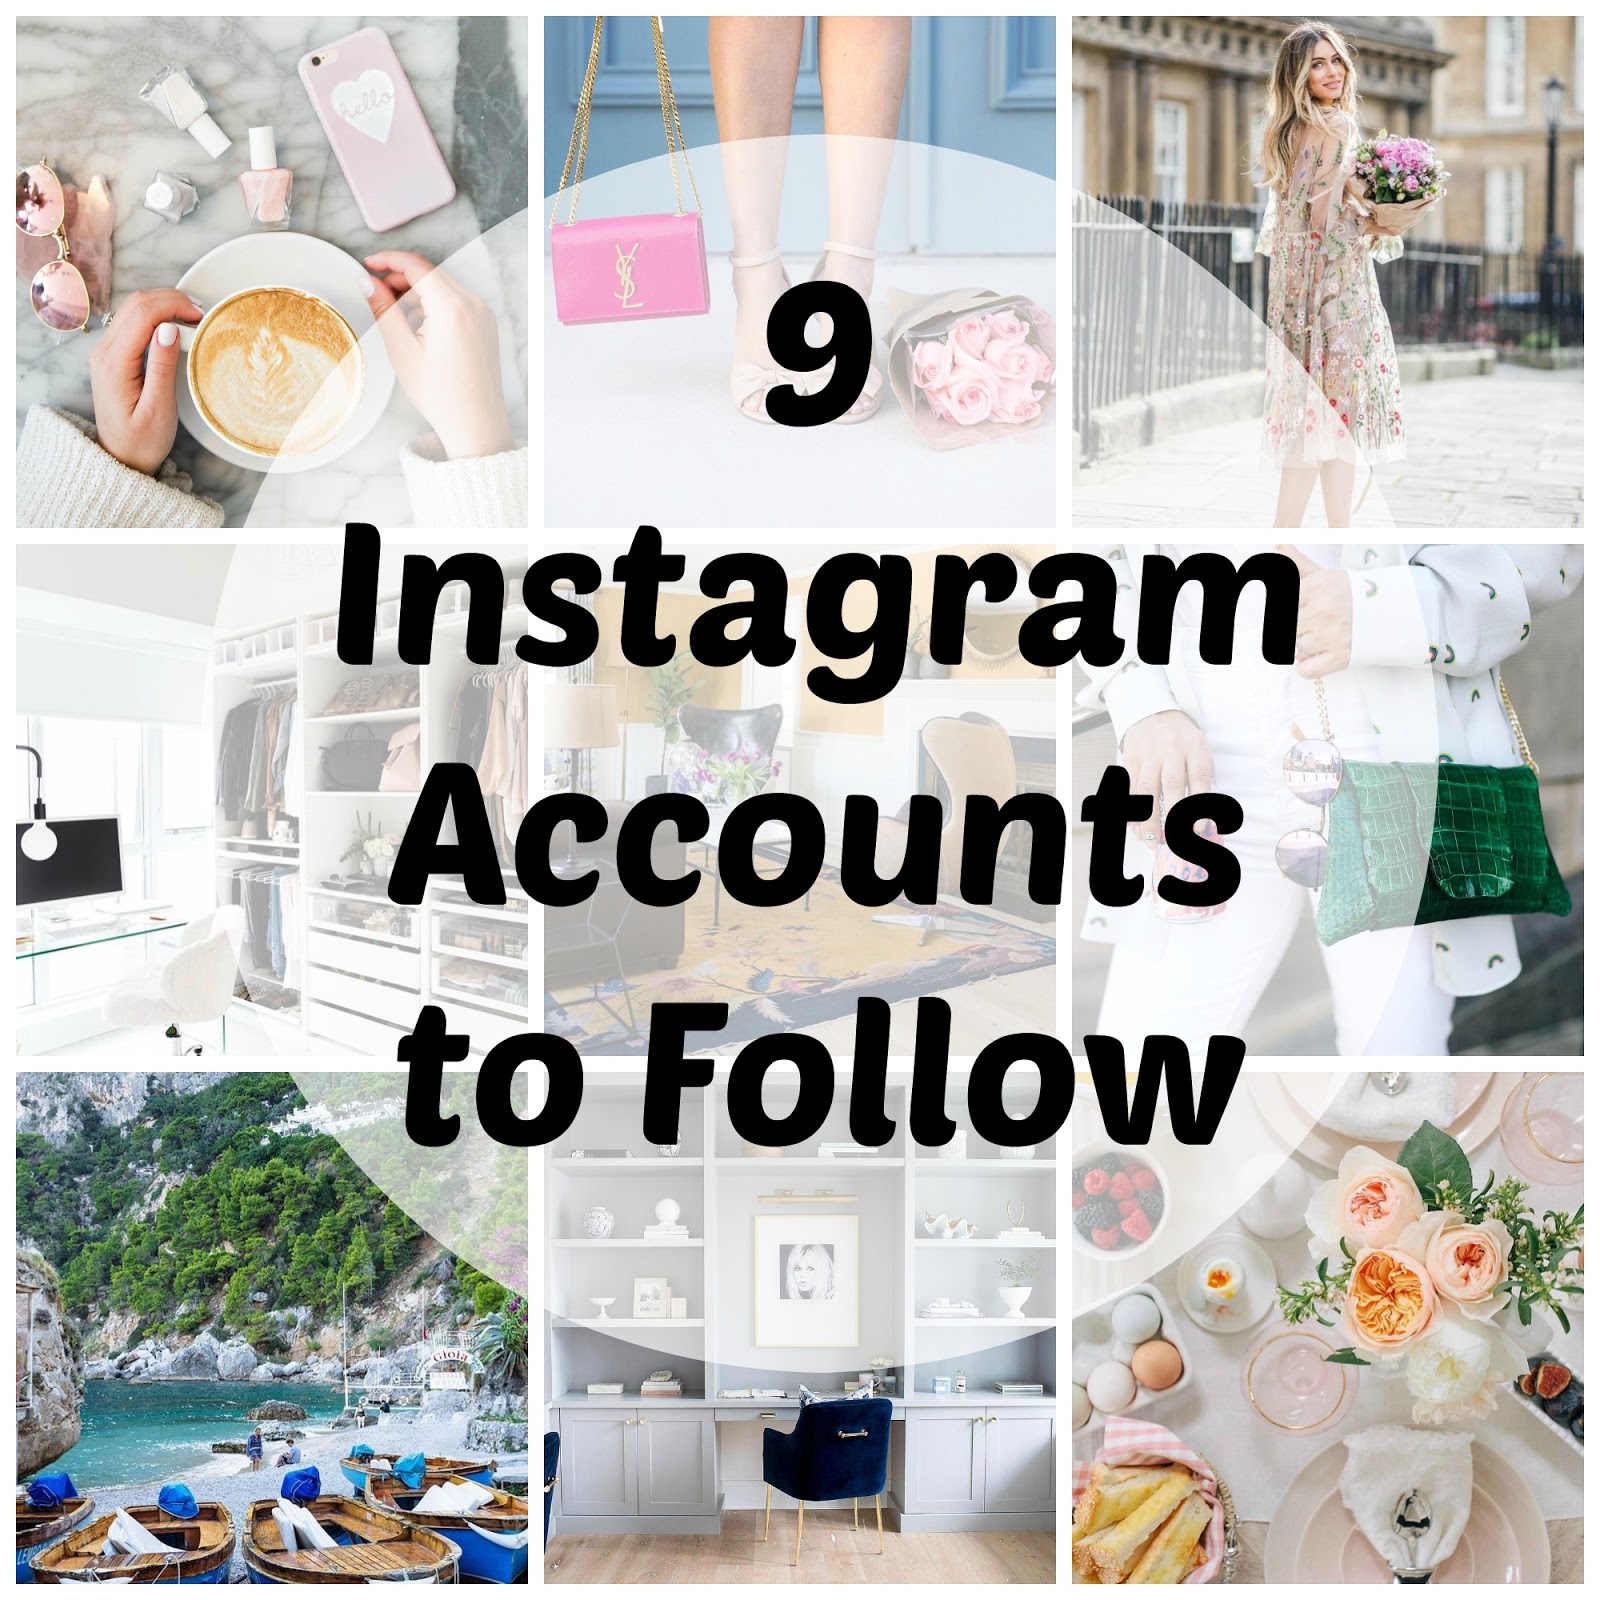 9 Instagram Accounts to Follow and hashtags